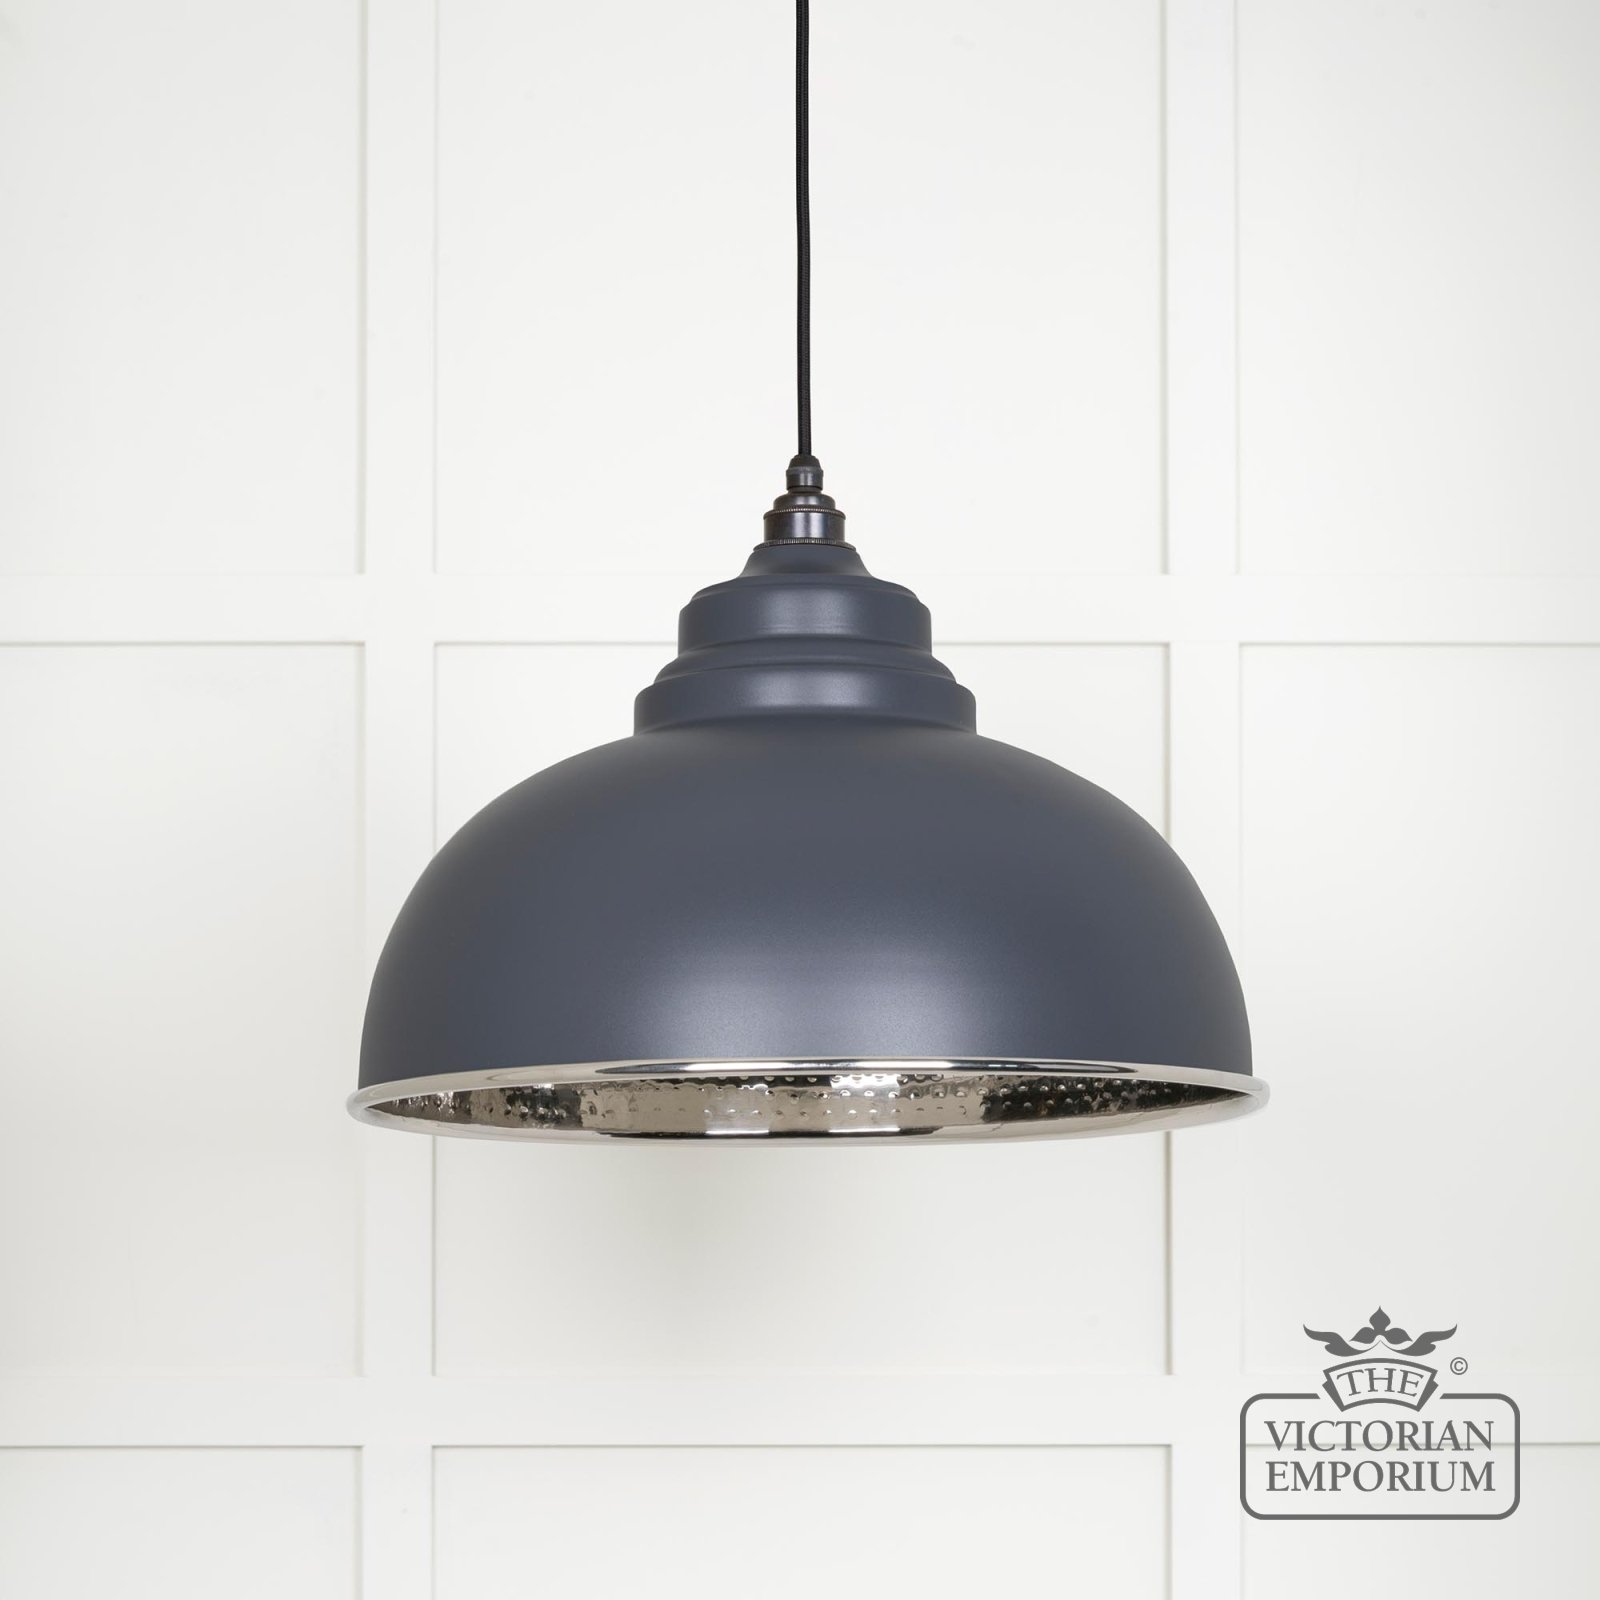 Harlow Pendant light in Hammered Nickel with Slate Exterior